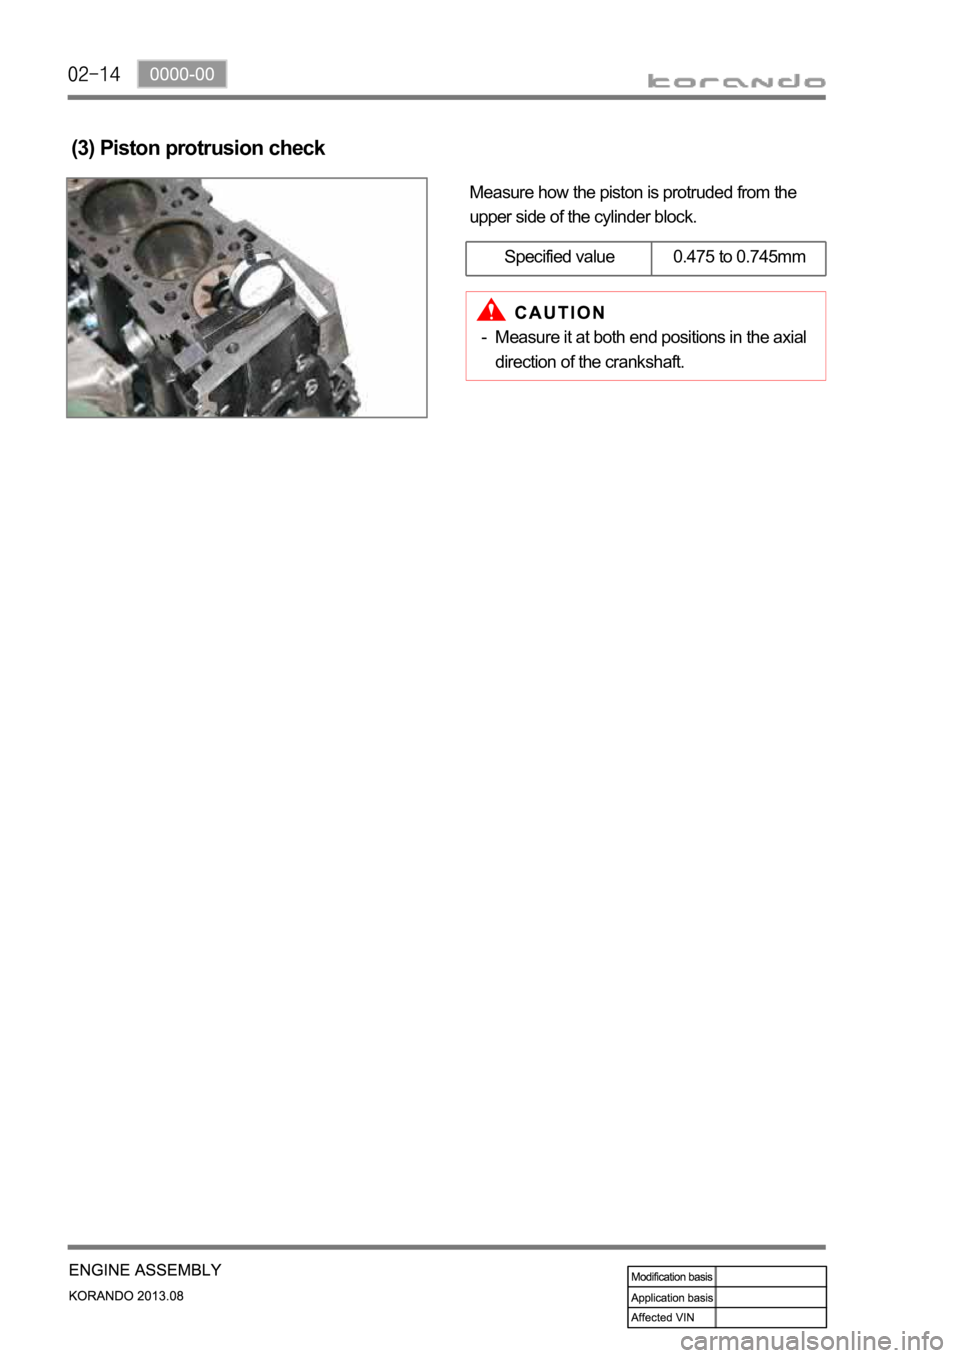 SSANGYONG KORANDO 2013  Service Manual Measure how the piston is protruded from the 
upper side of the cylinder block.
(3) Piston protrusion check
Specified value 0.475 to 0.745mm
Measure it at both end positions in the axial 
direction of